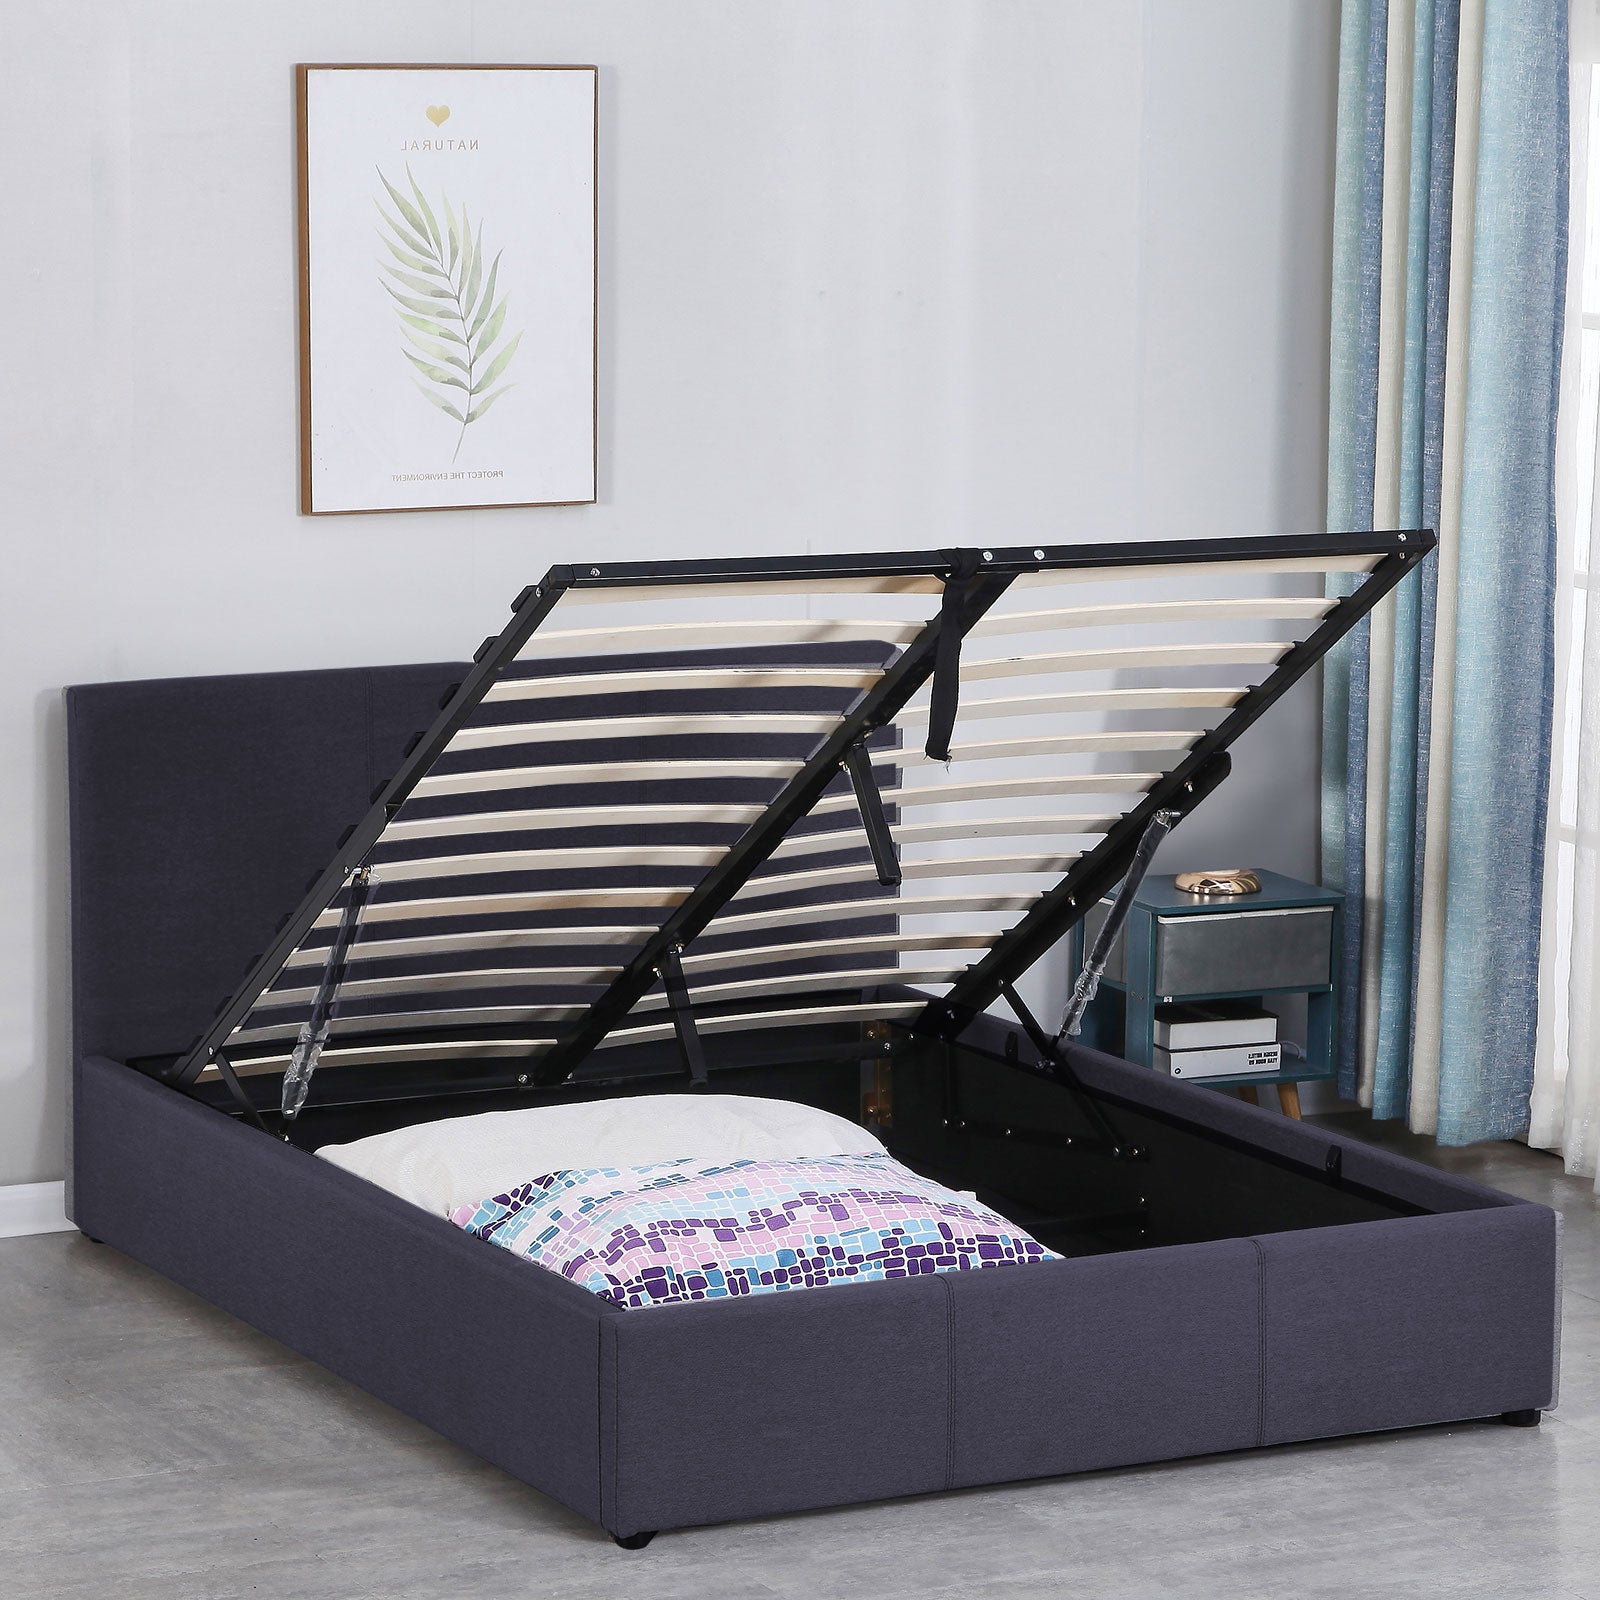 Milano Luxury Gas Lift Bed Frame Base And Headboard With Storage - King Single - Charcoal